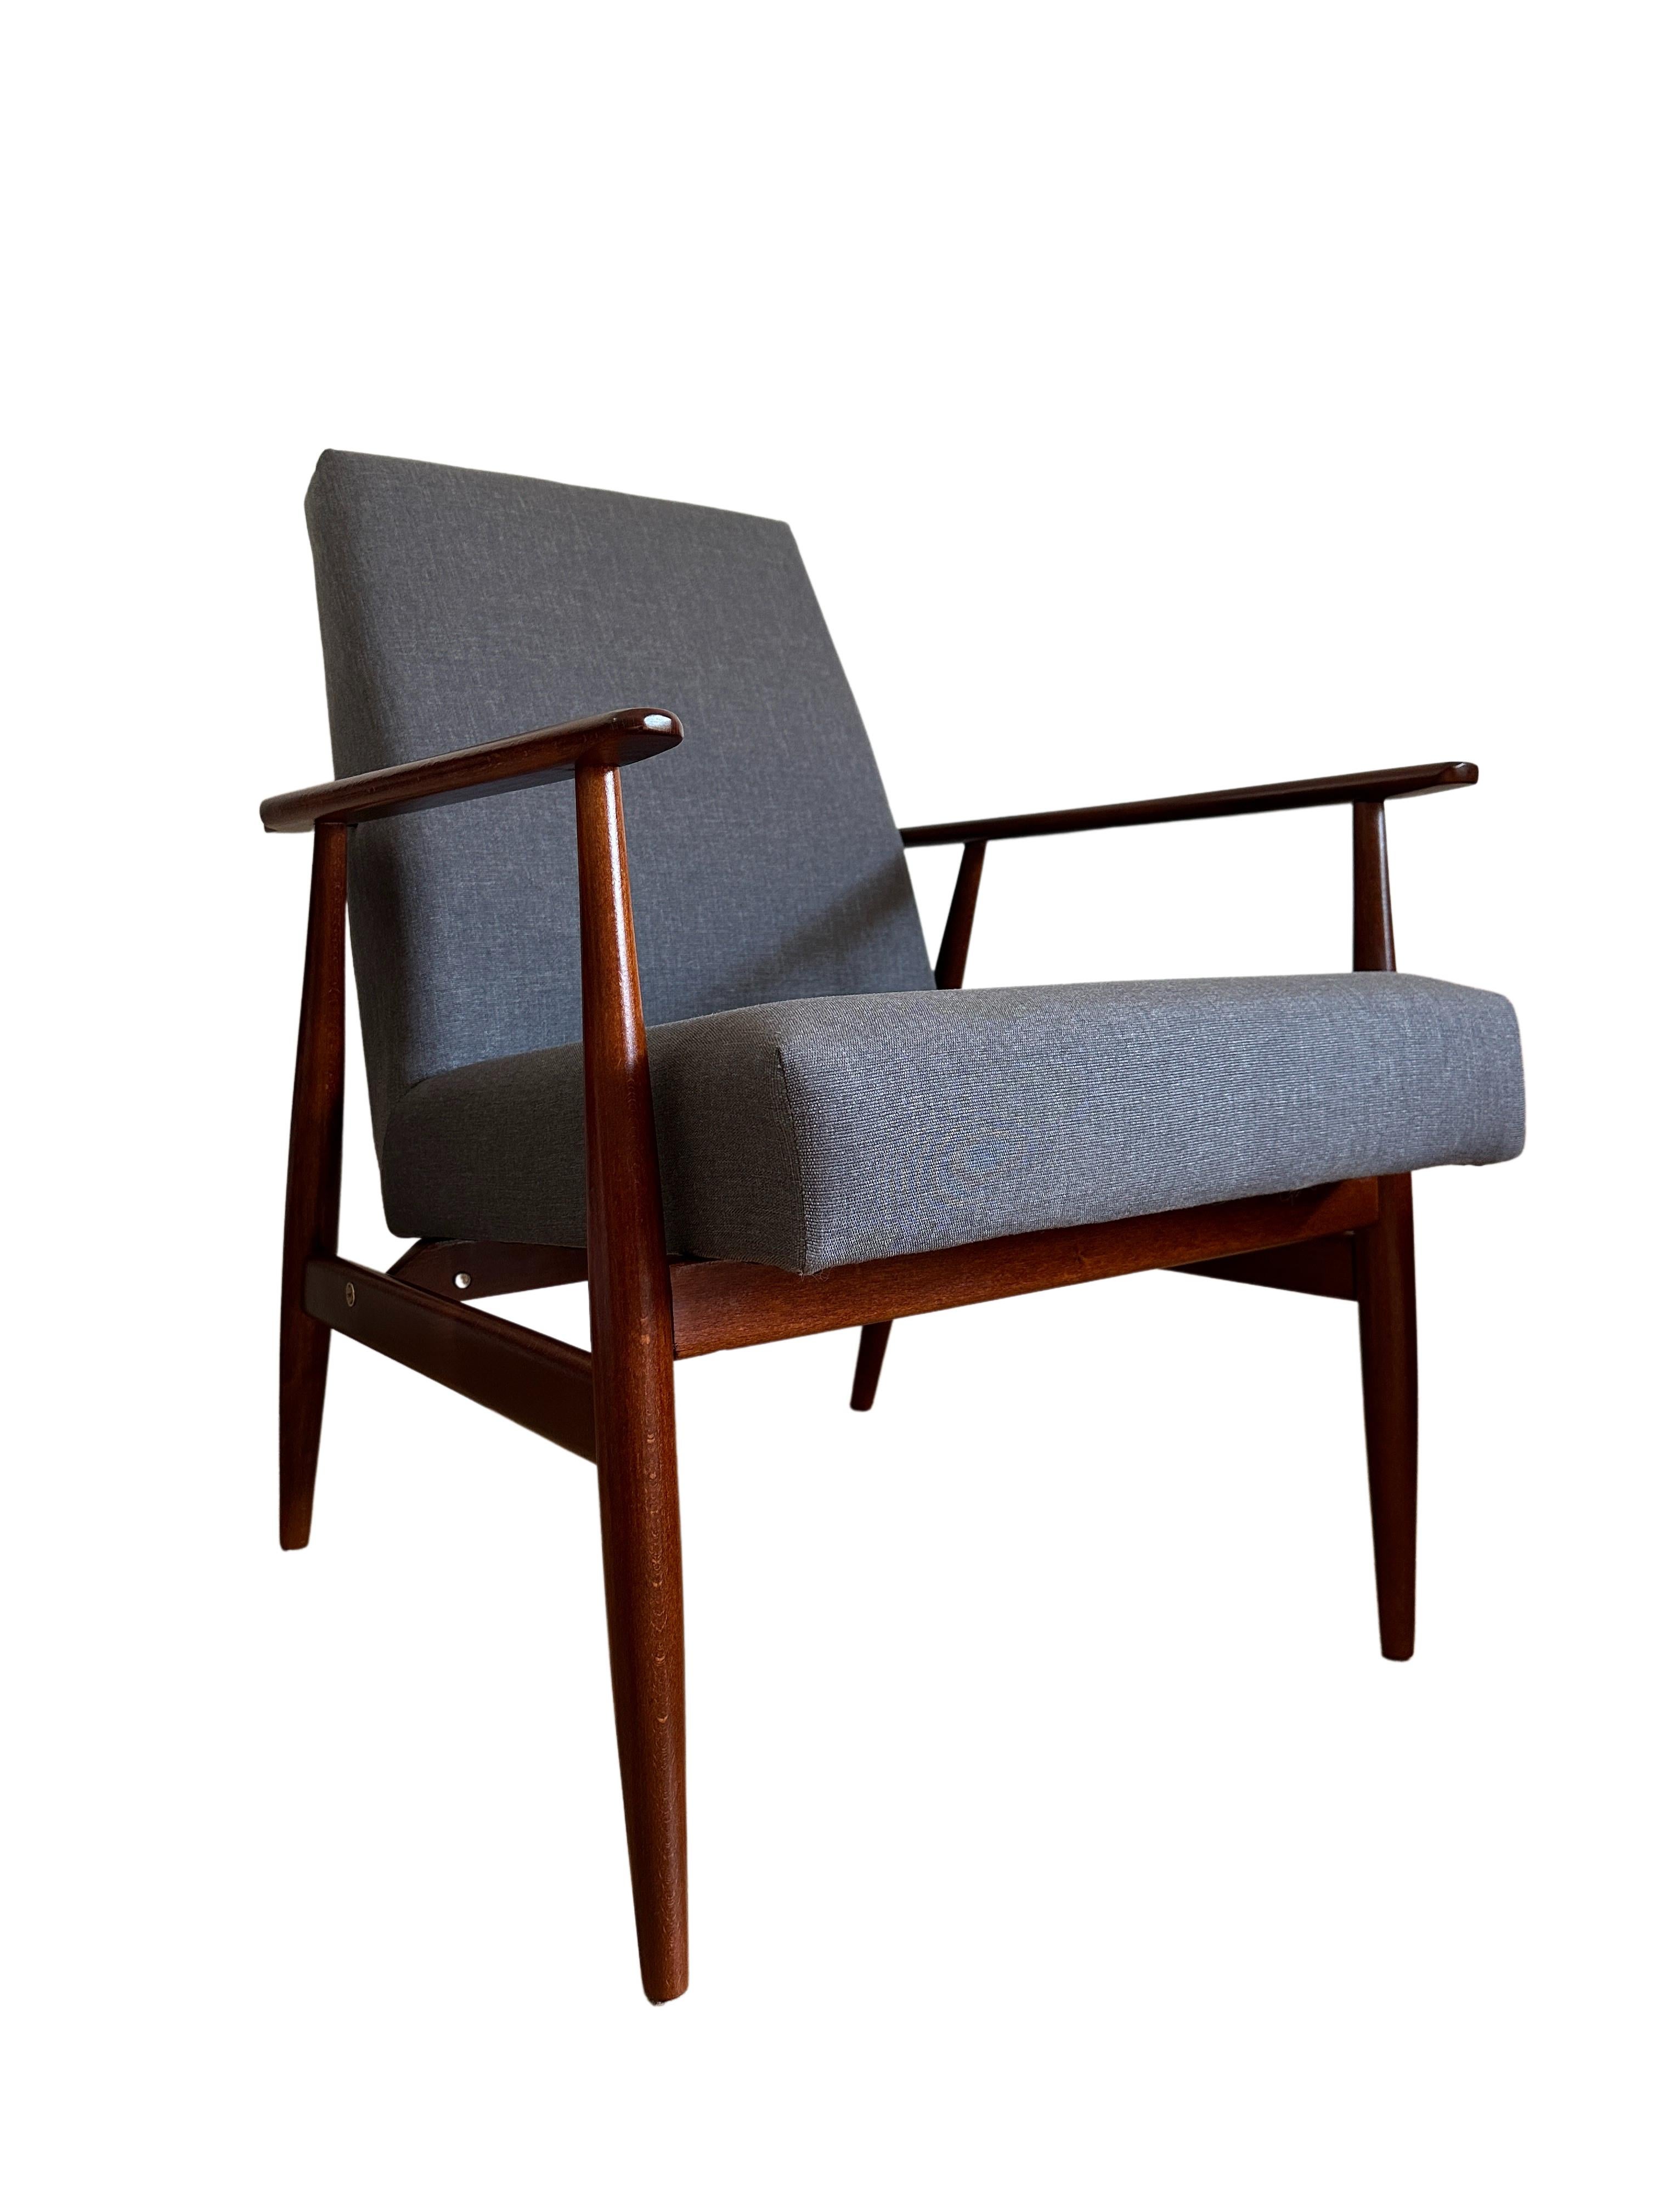 Midcentury Armchair in Kvadrat Upholstery by Henryk Lis, Europe, 1960s For Sale 3